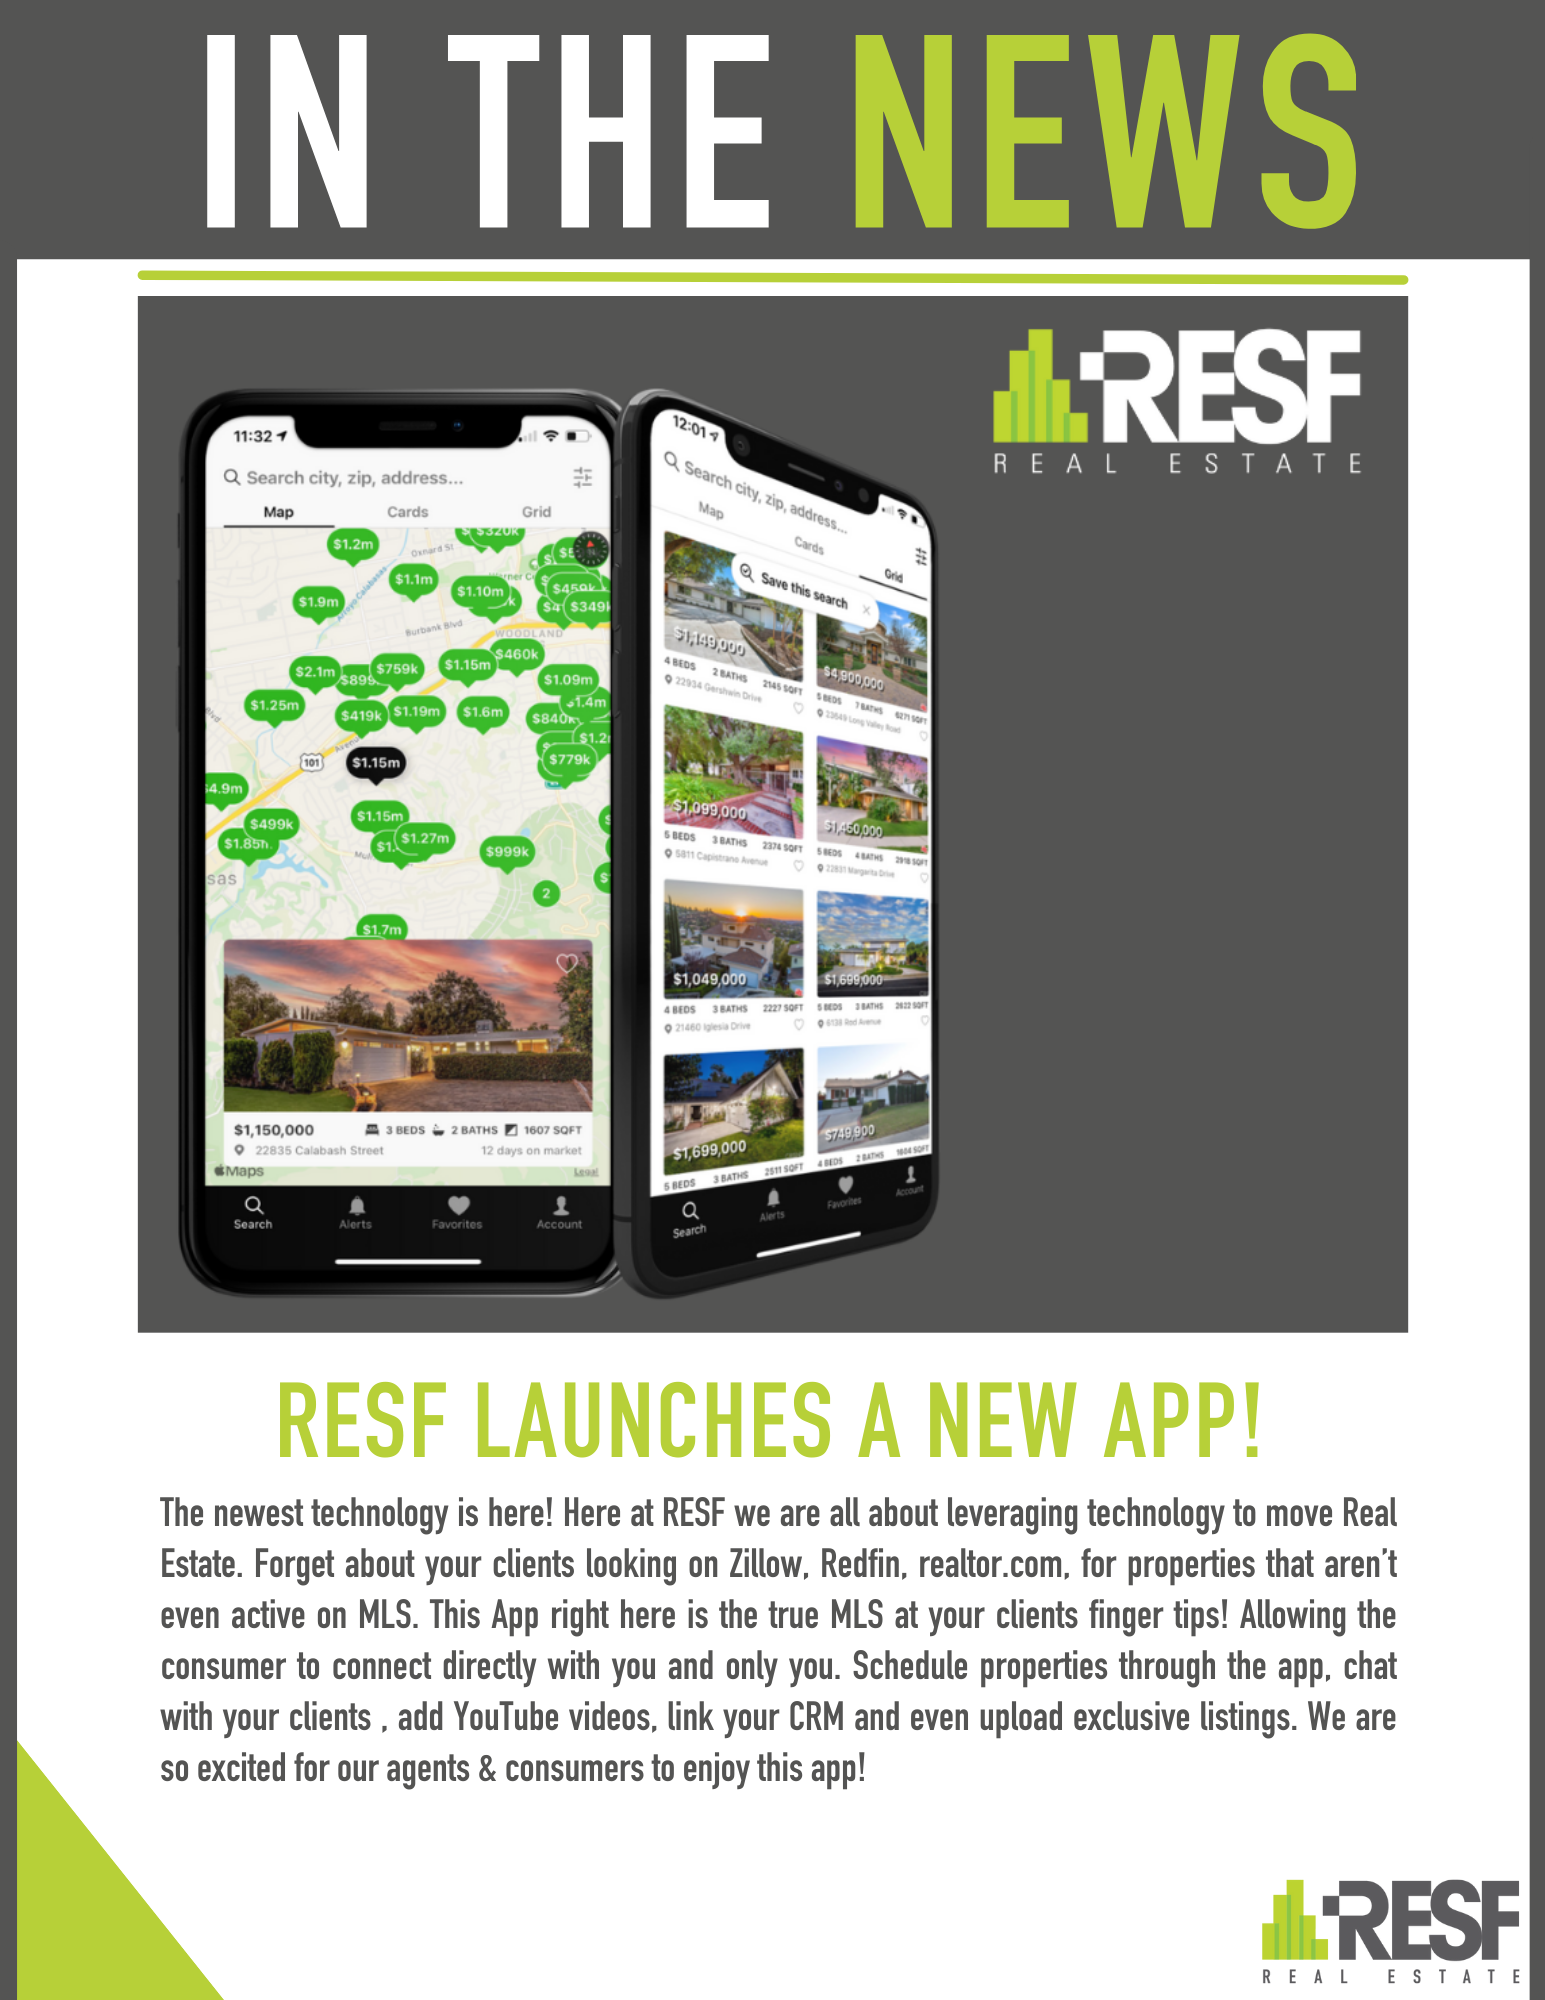 RESF LAUNCHES A NEW APP!